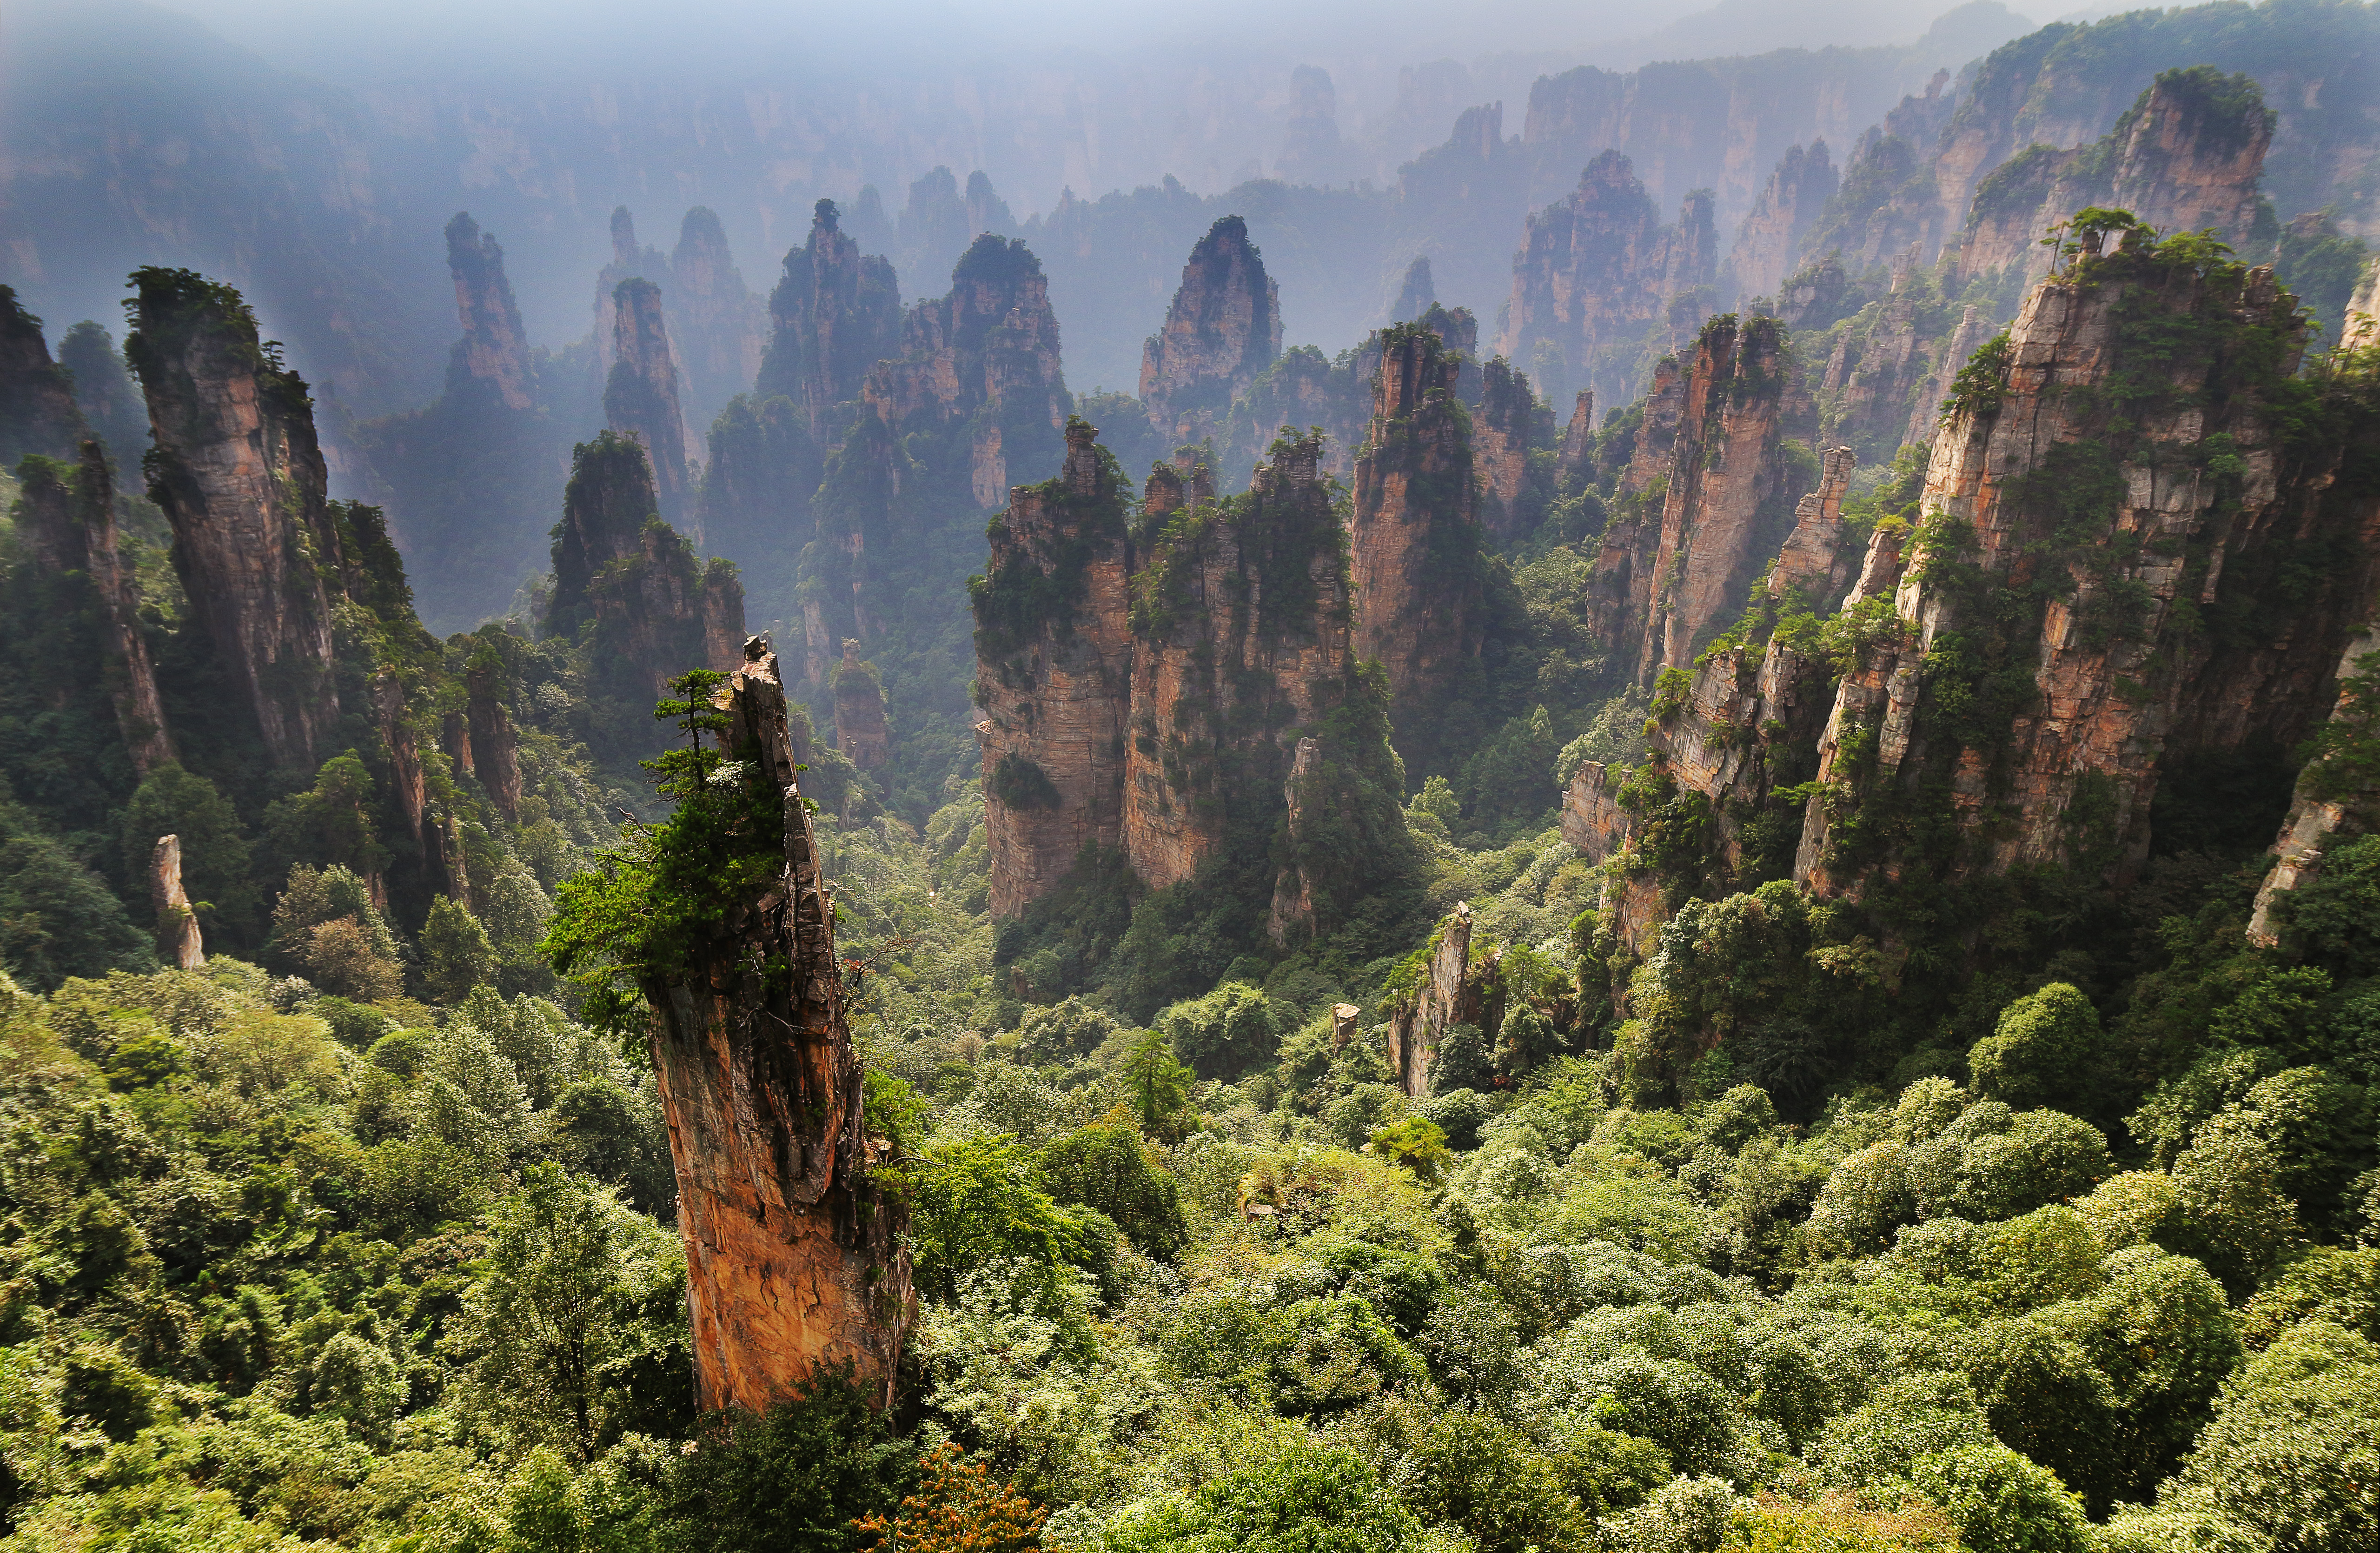 Forest in Hunan, China